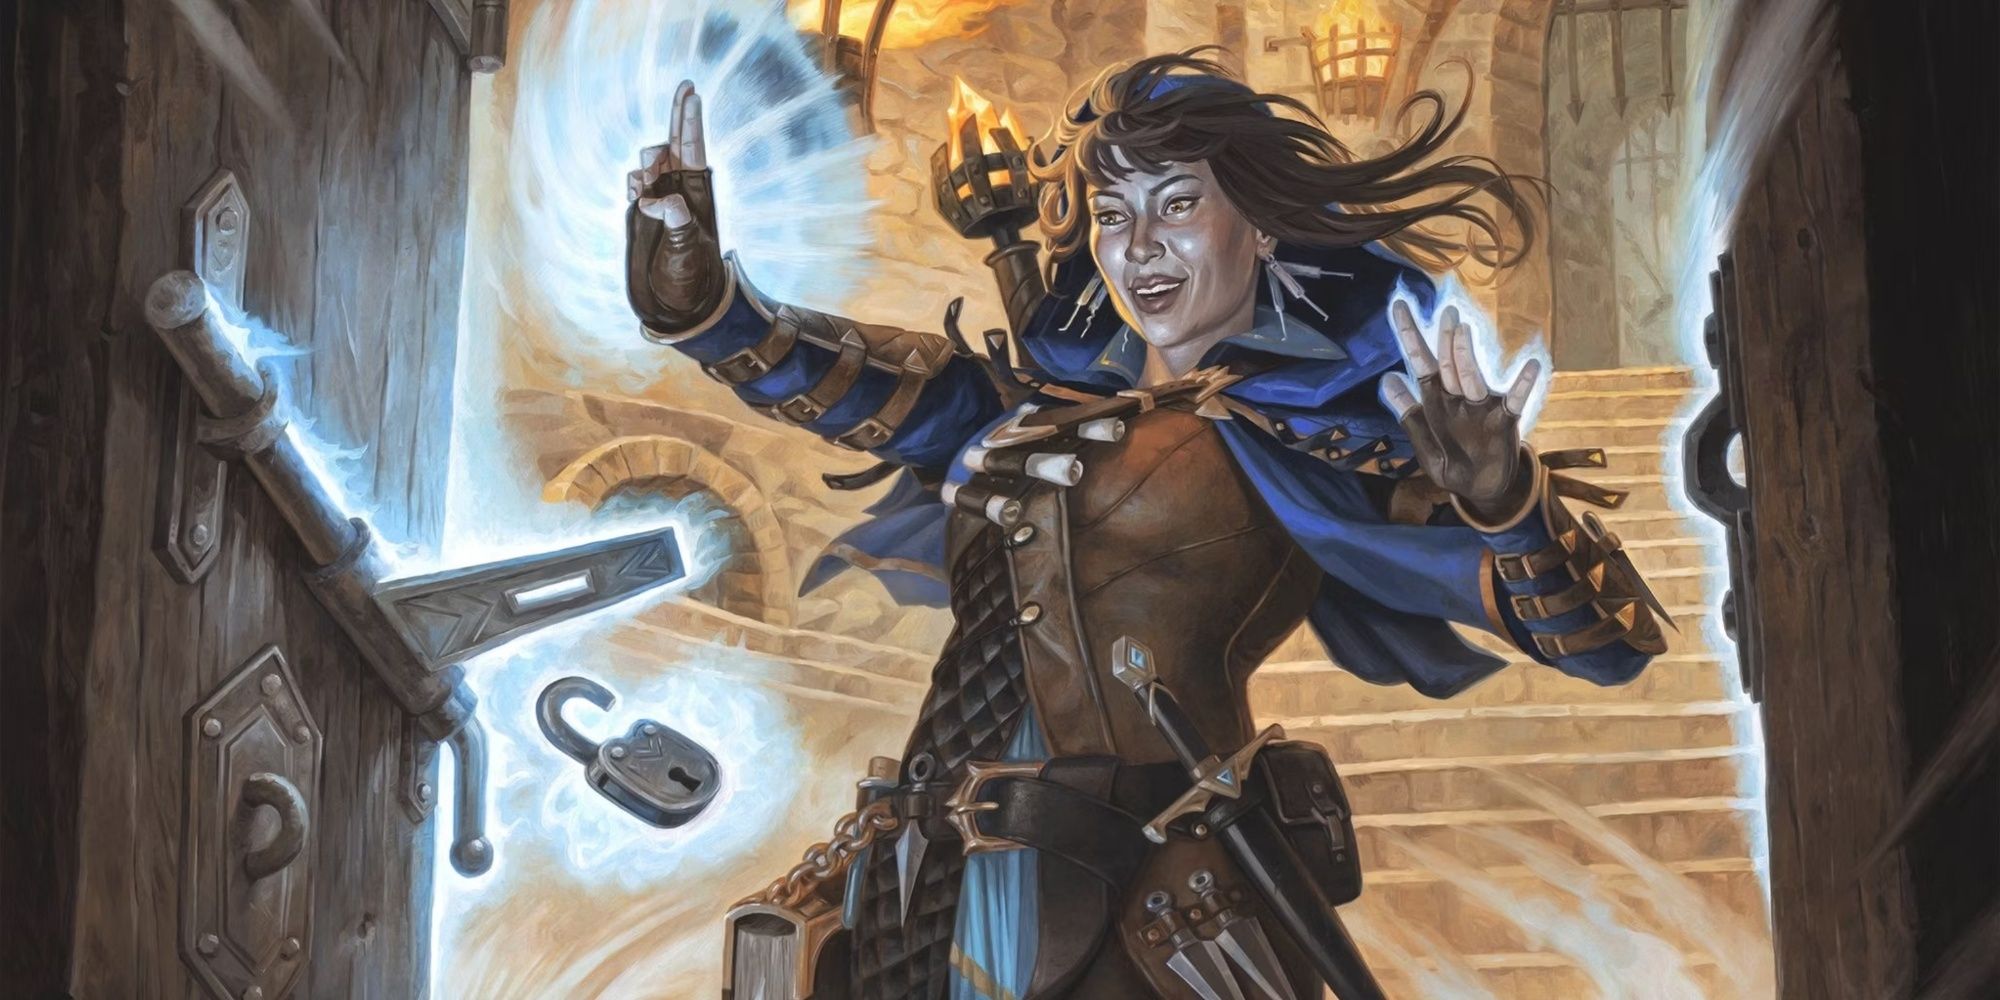 How To Build An Arcane Trickster In DnD